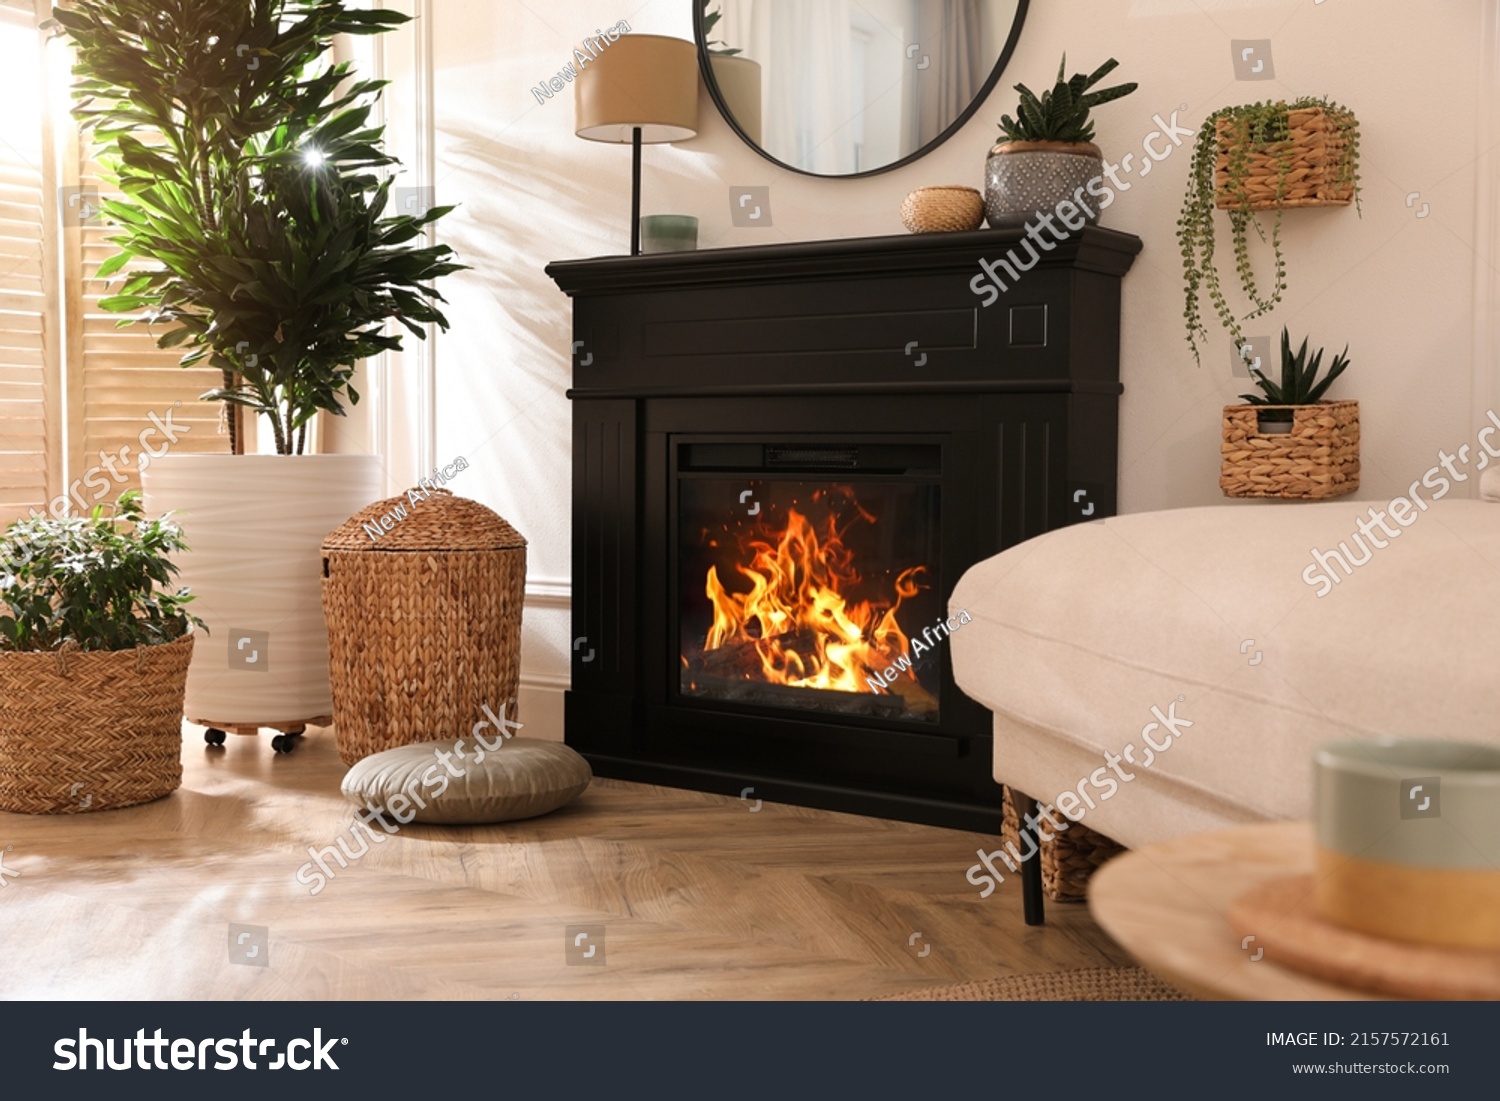 Stylish room interior with electric fireplace and beautiful decor elements #2157572161